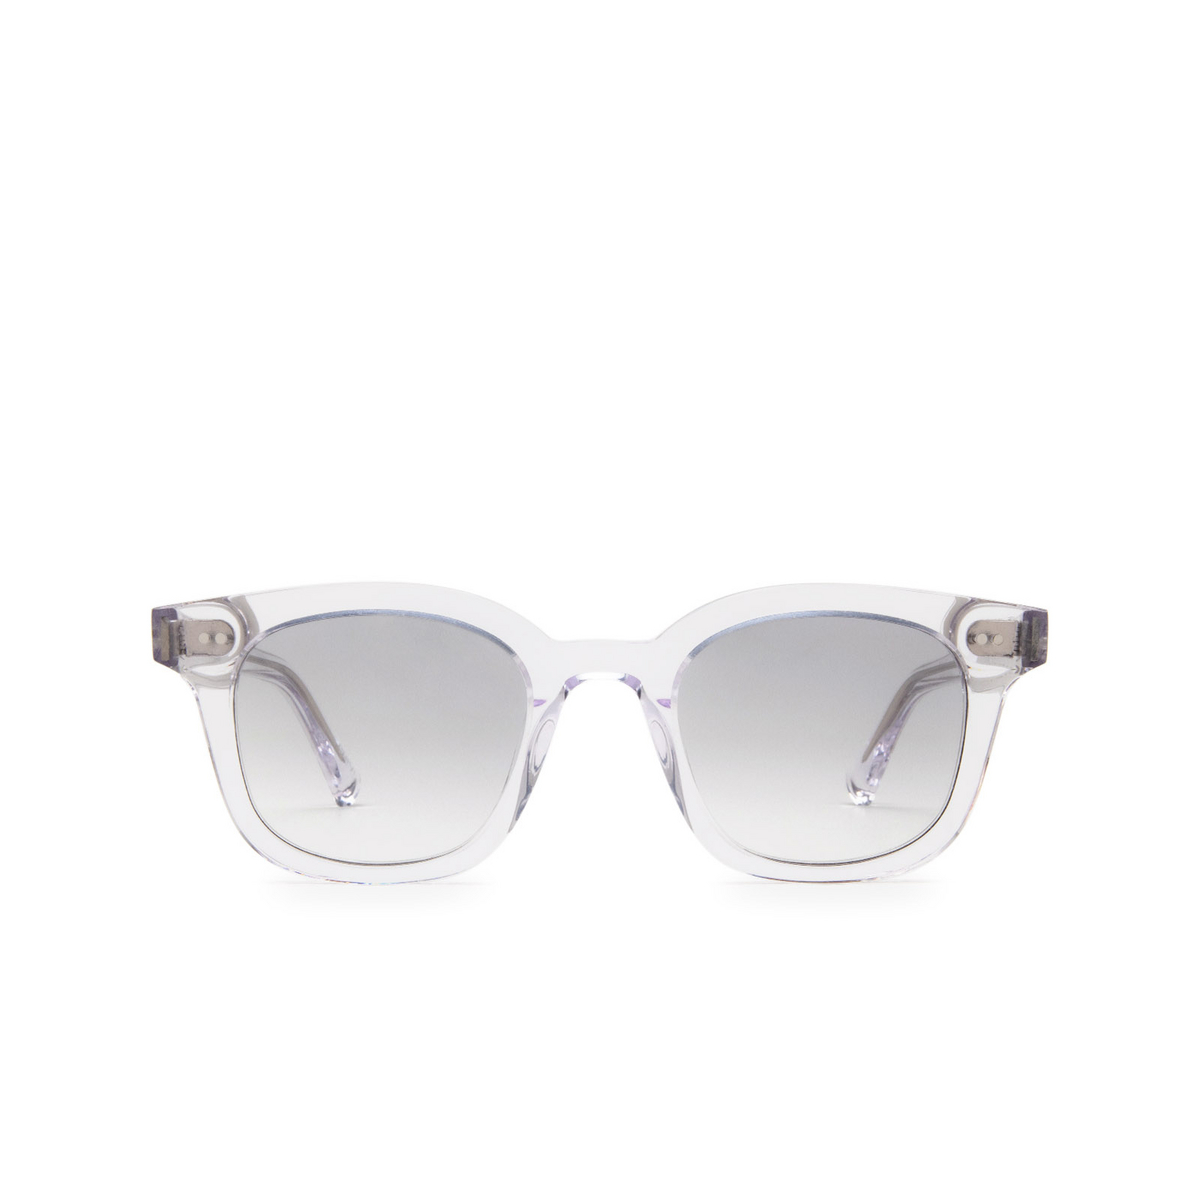 Chimi 02 Sunglasses CLEAR - front view